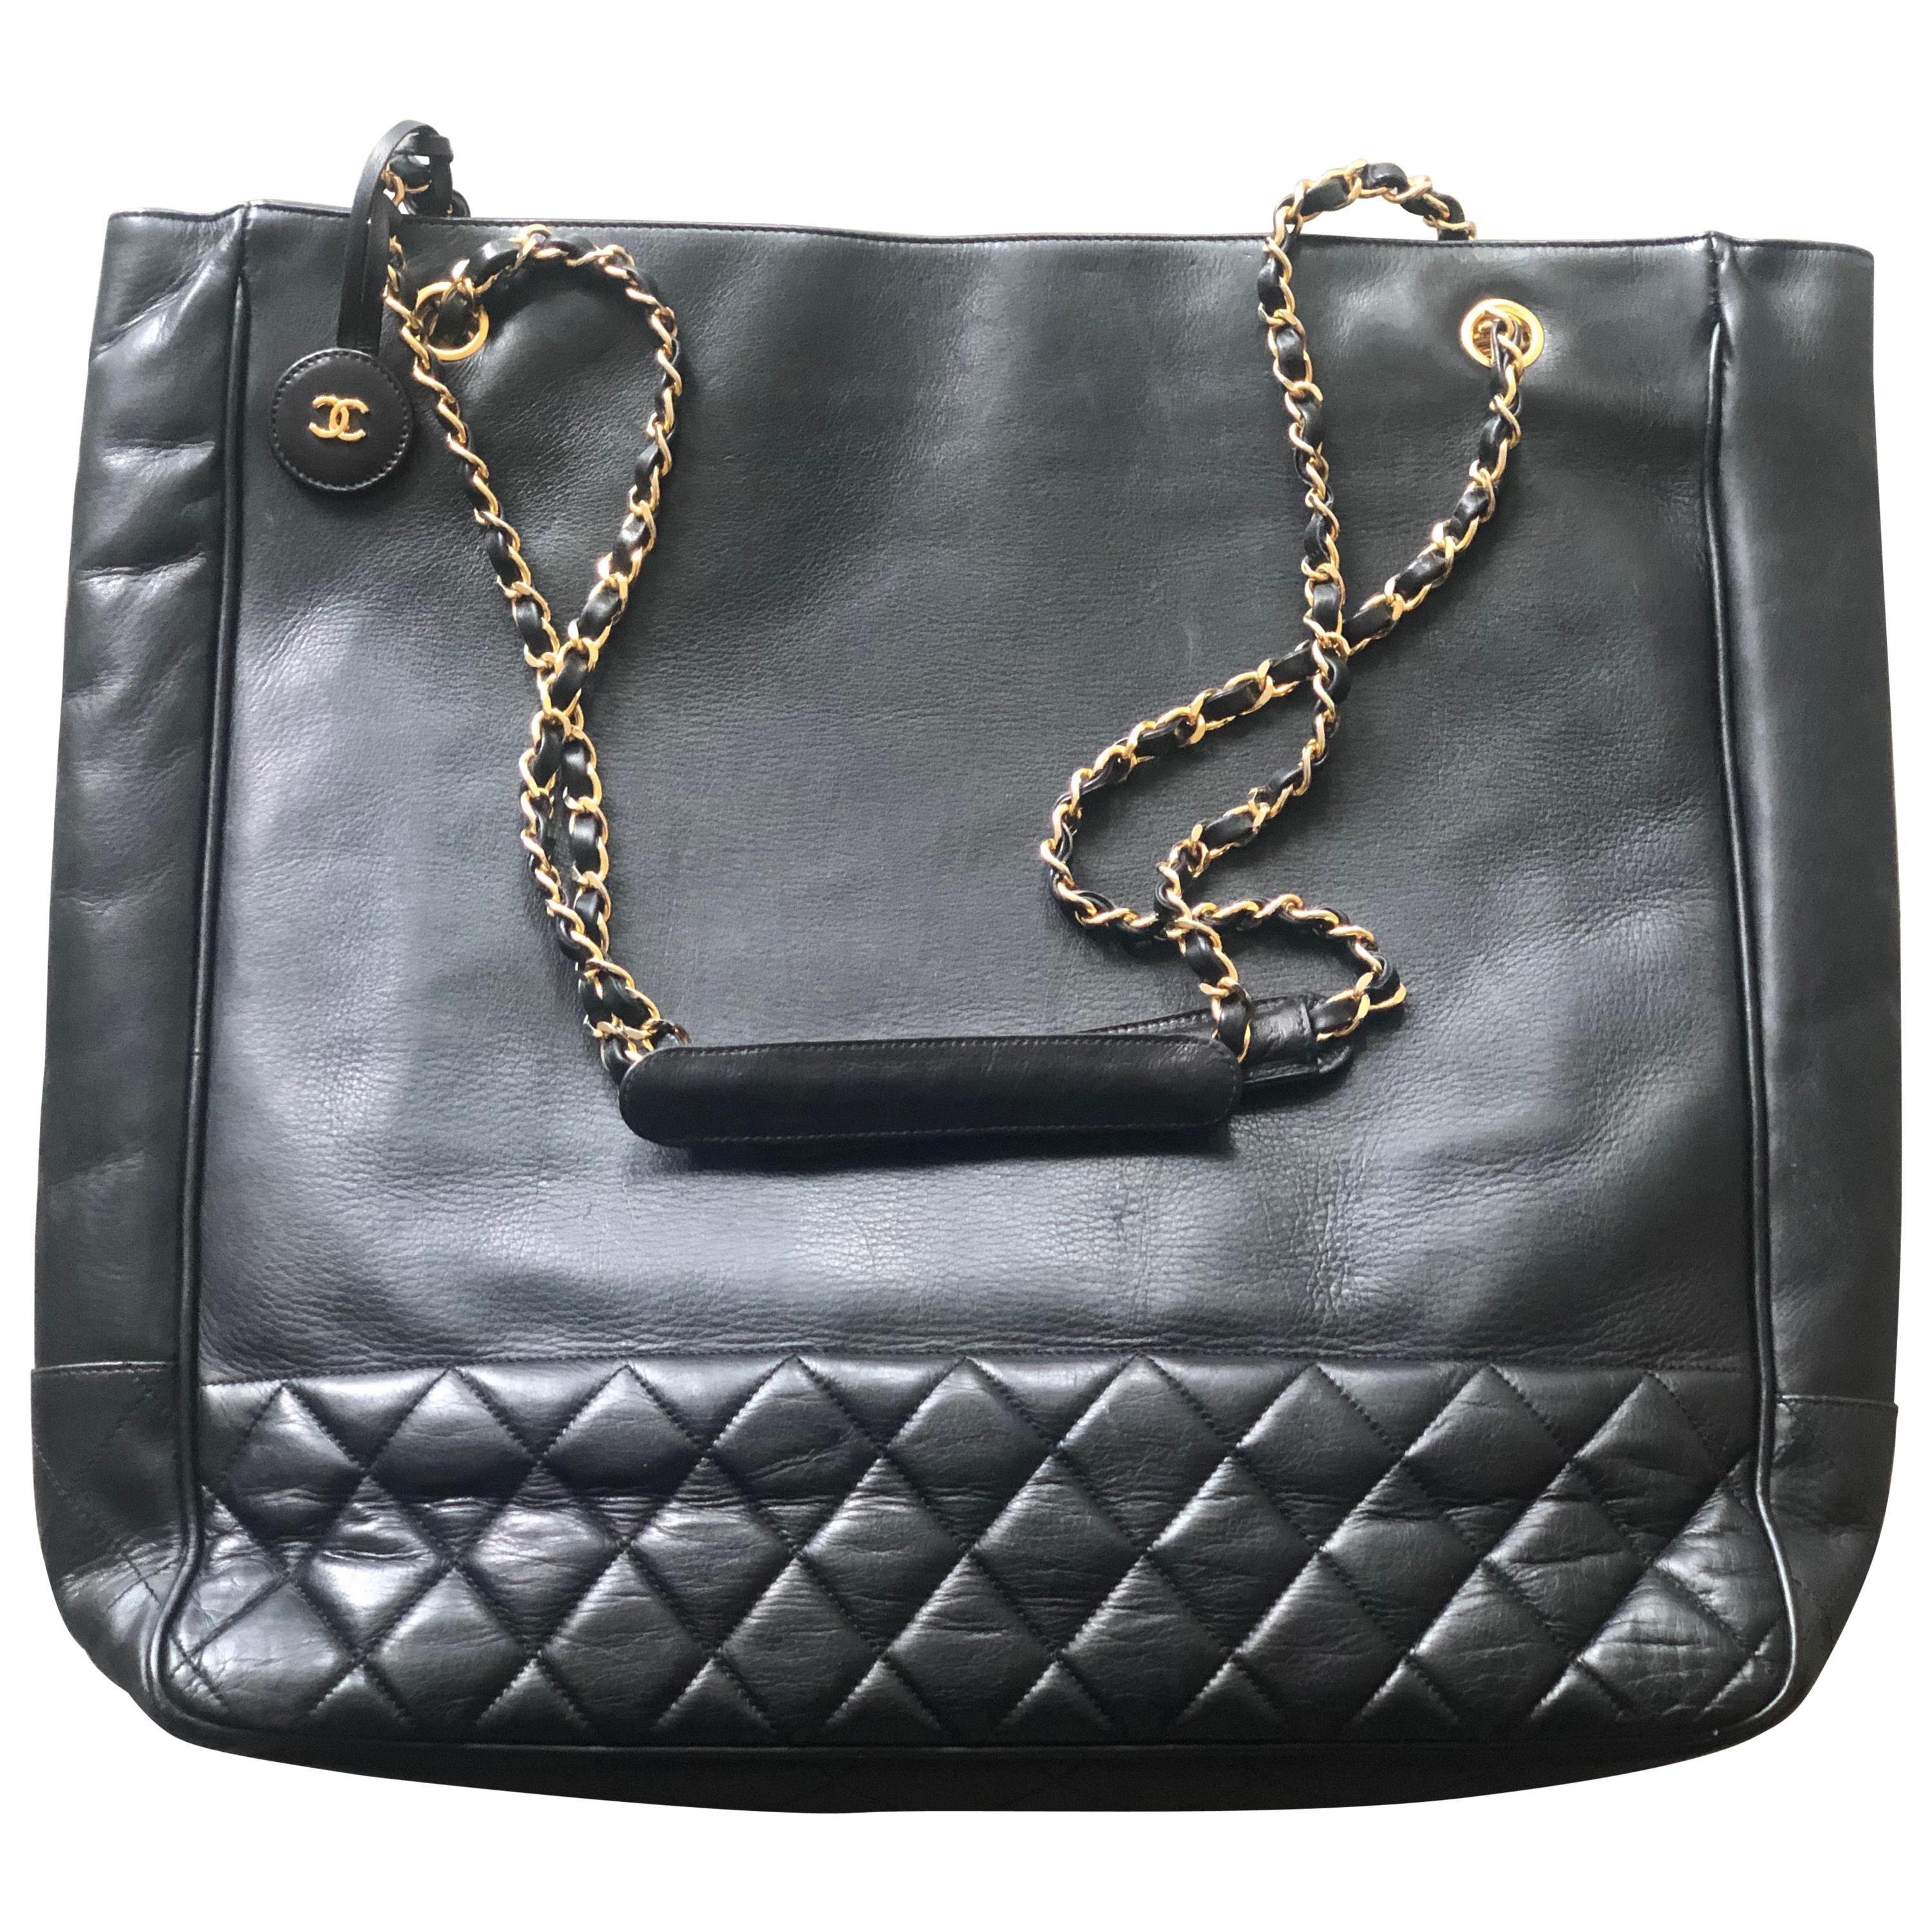 Chanel Large Black Leather Shoulder Bag with Gold Hardware and Quilted Details  For Sale